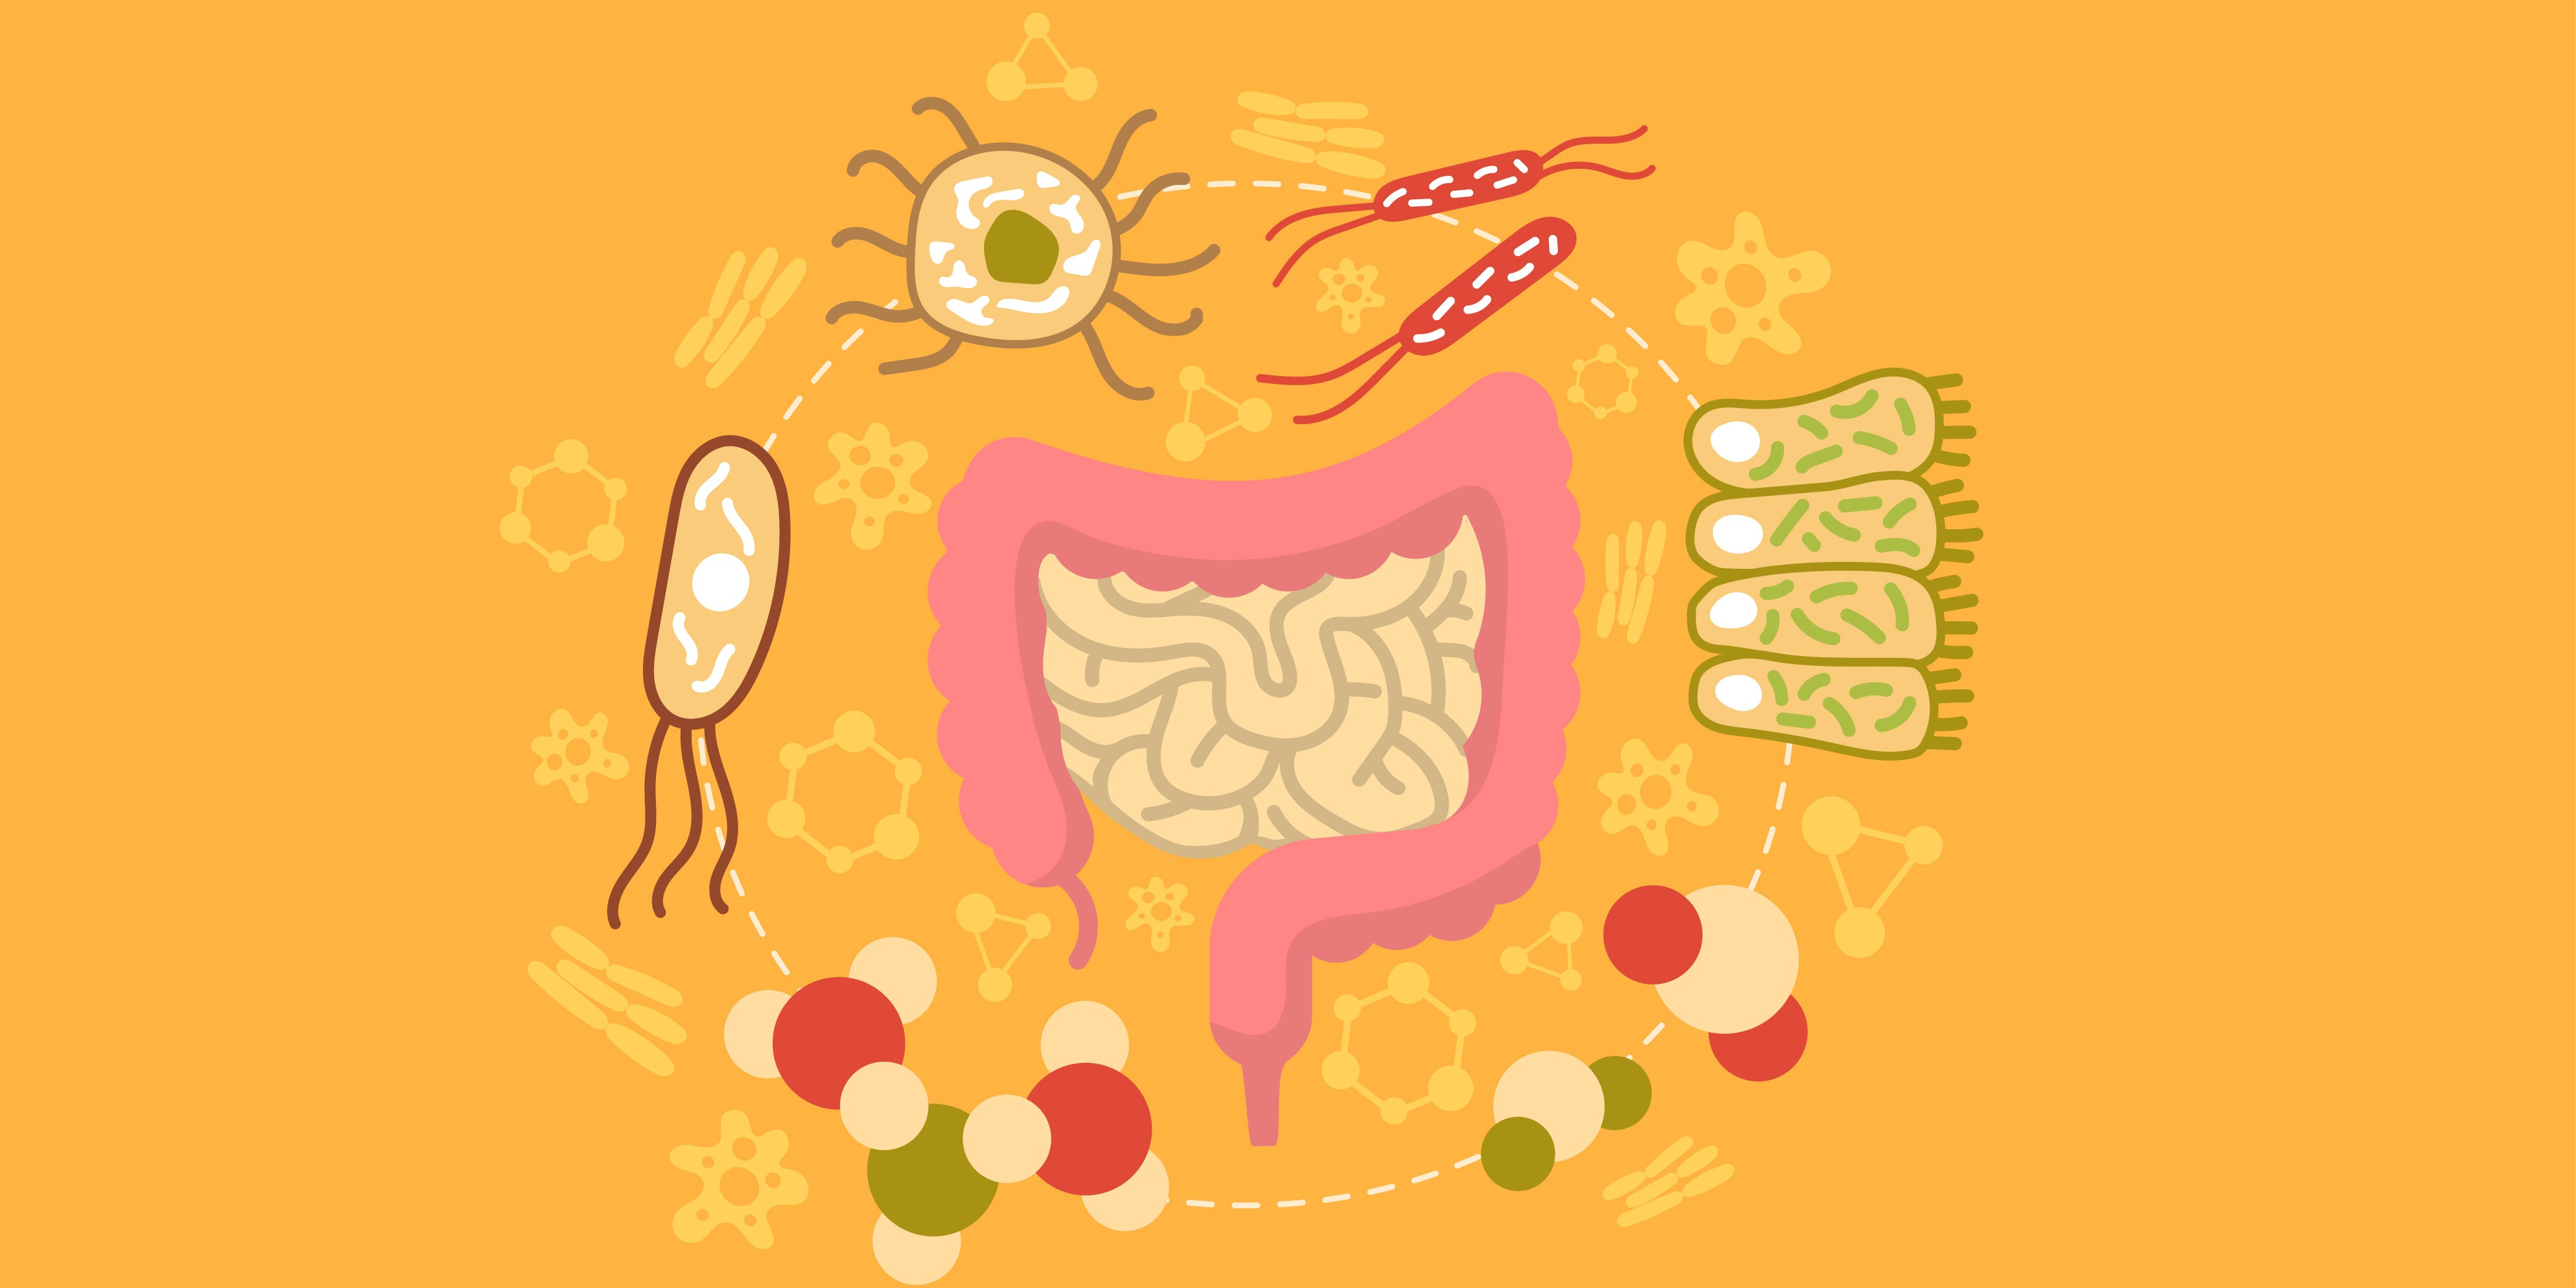 Types of Gut Bacteria